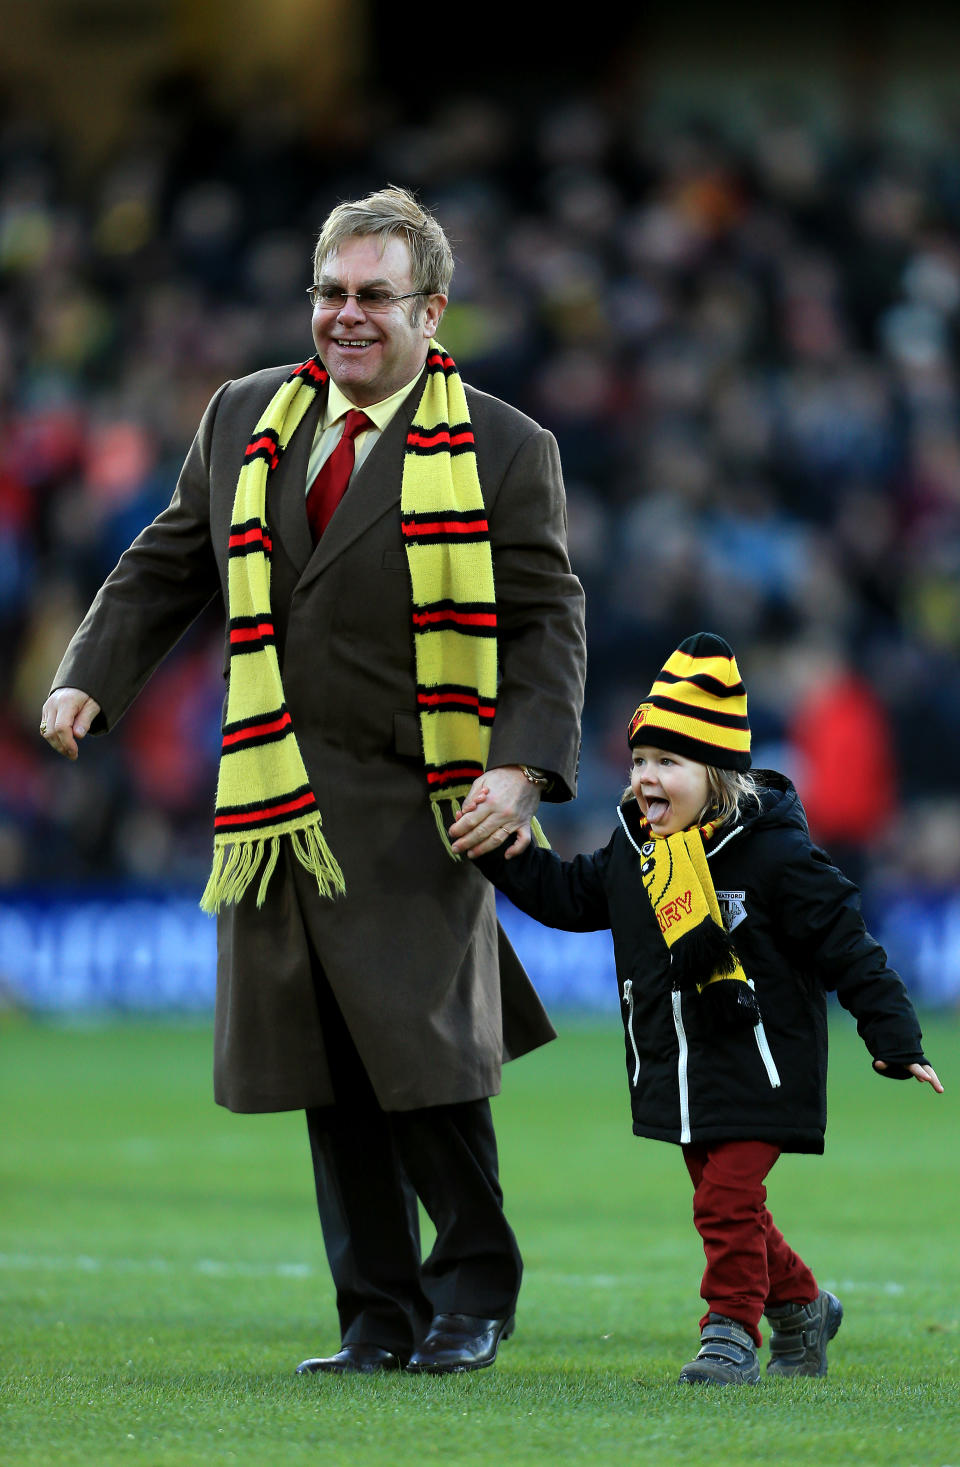 Elton and his son walking on a football field